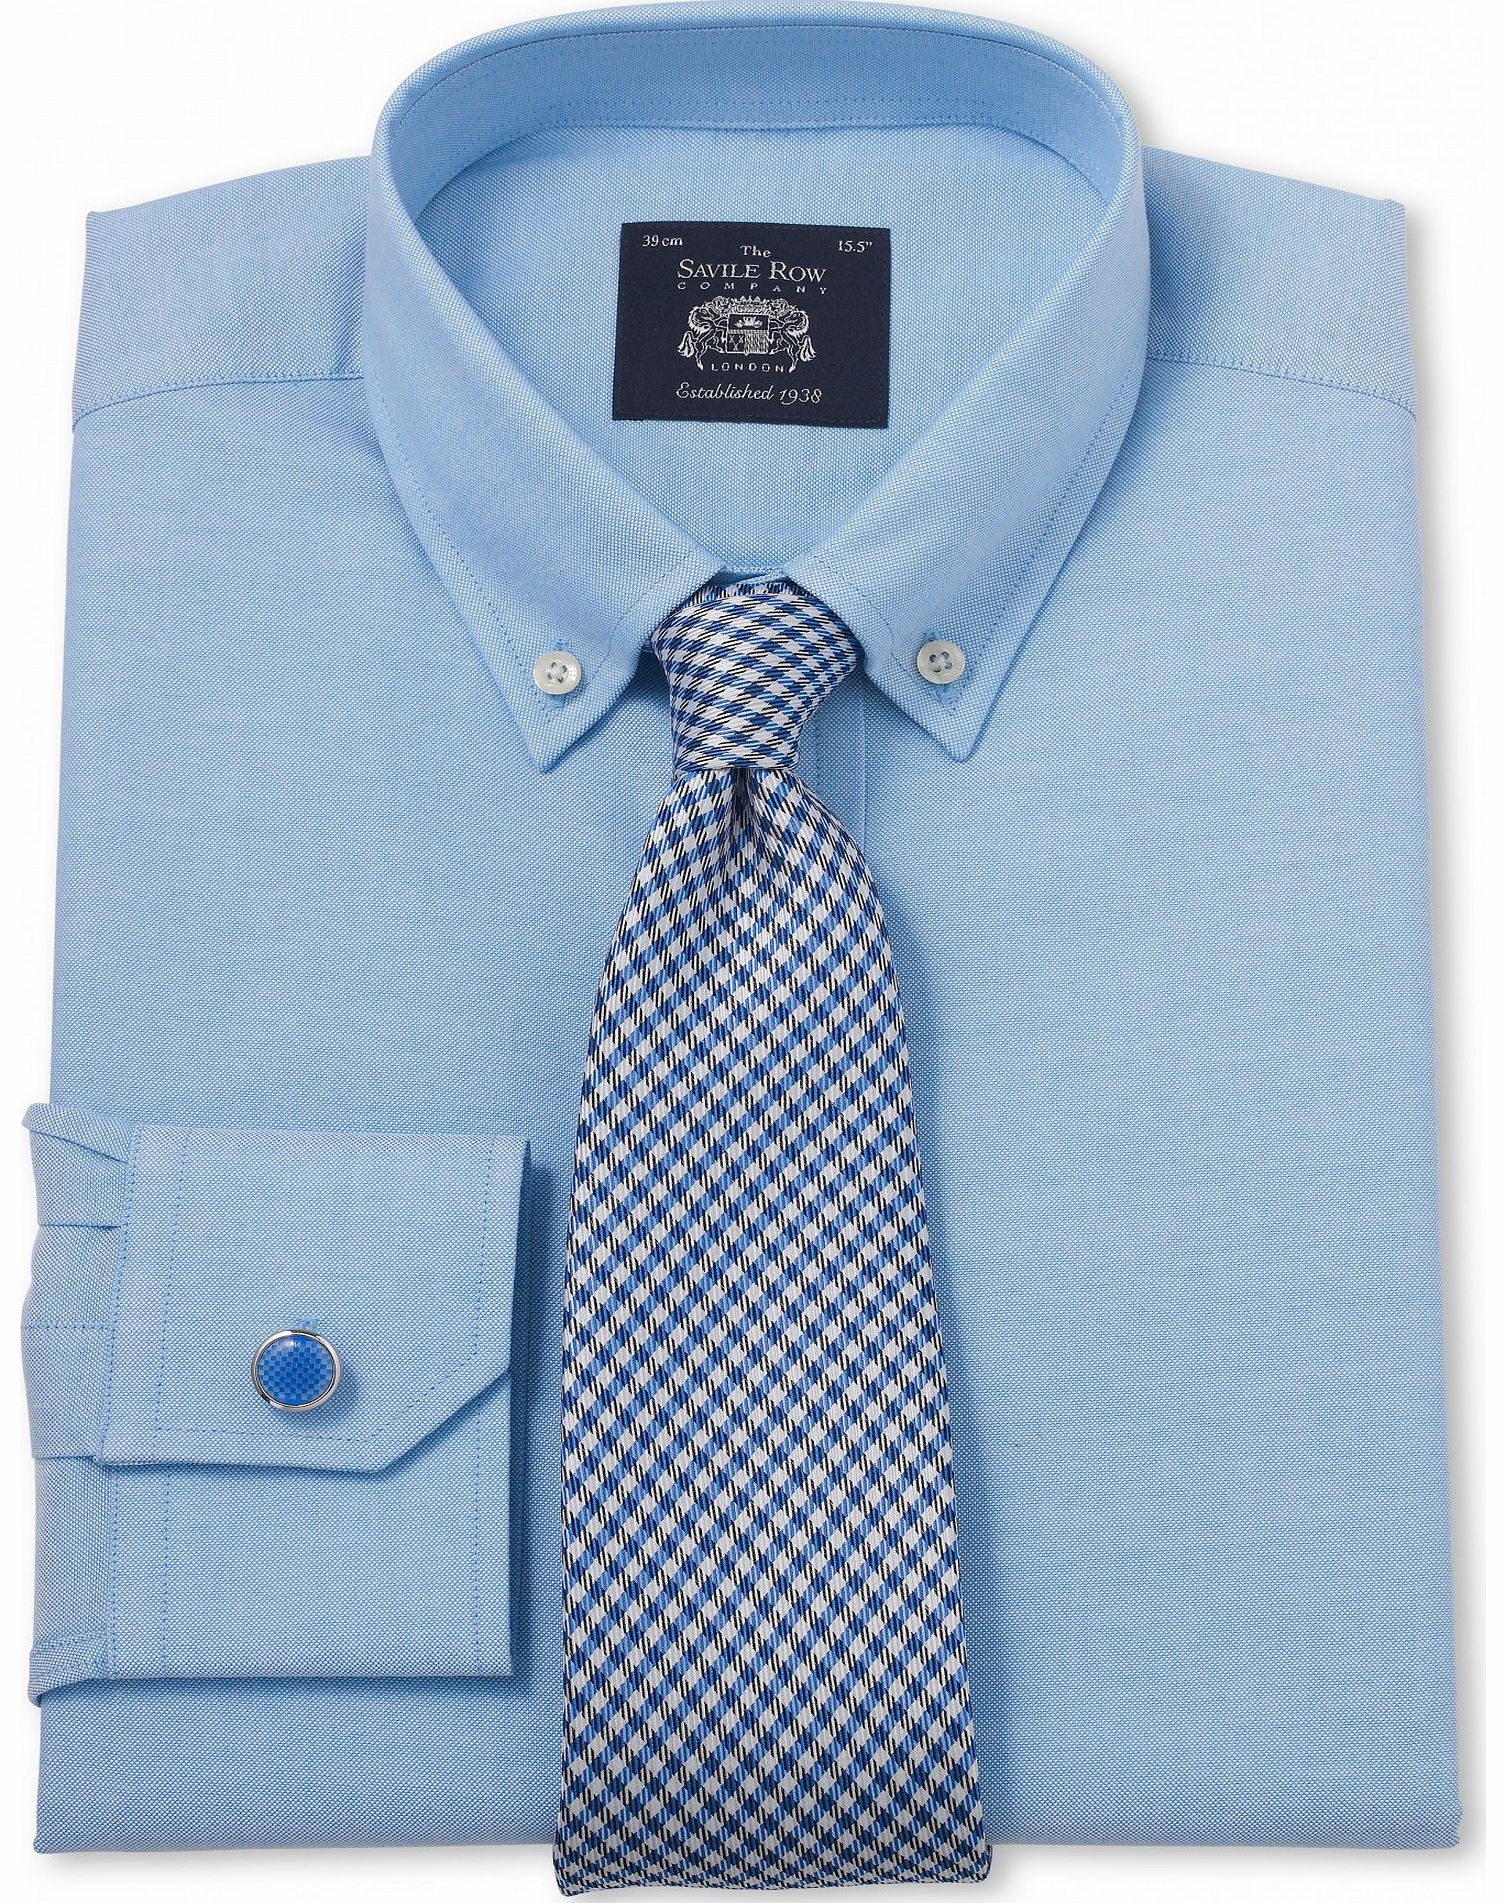 Savile Row Company Blue Pinpoint Slim Fit Shirt 17`` Lengthened